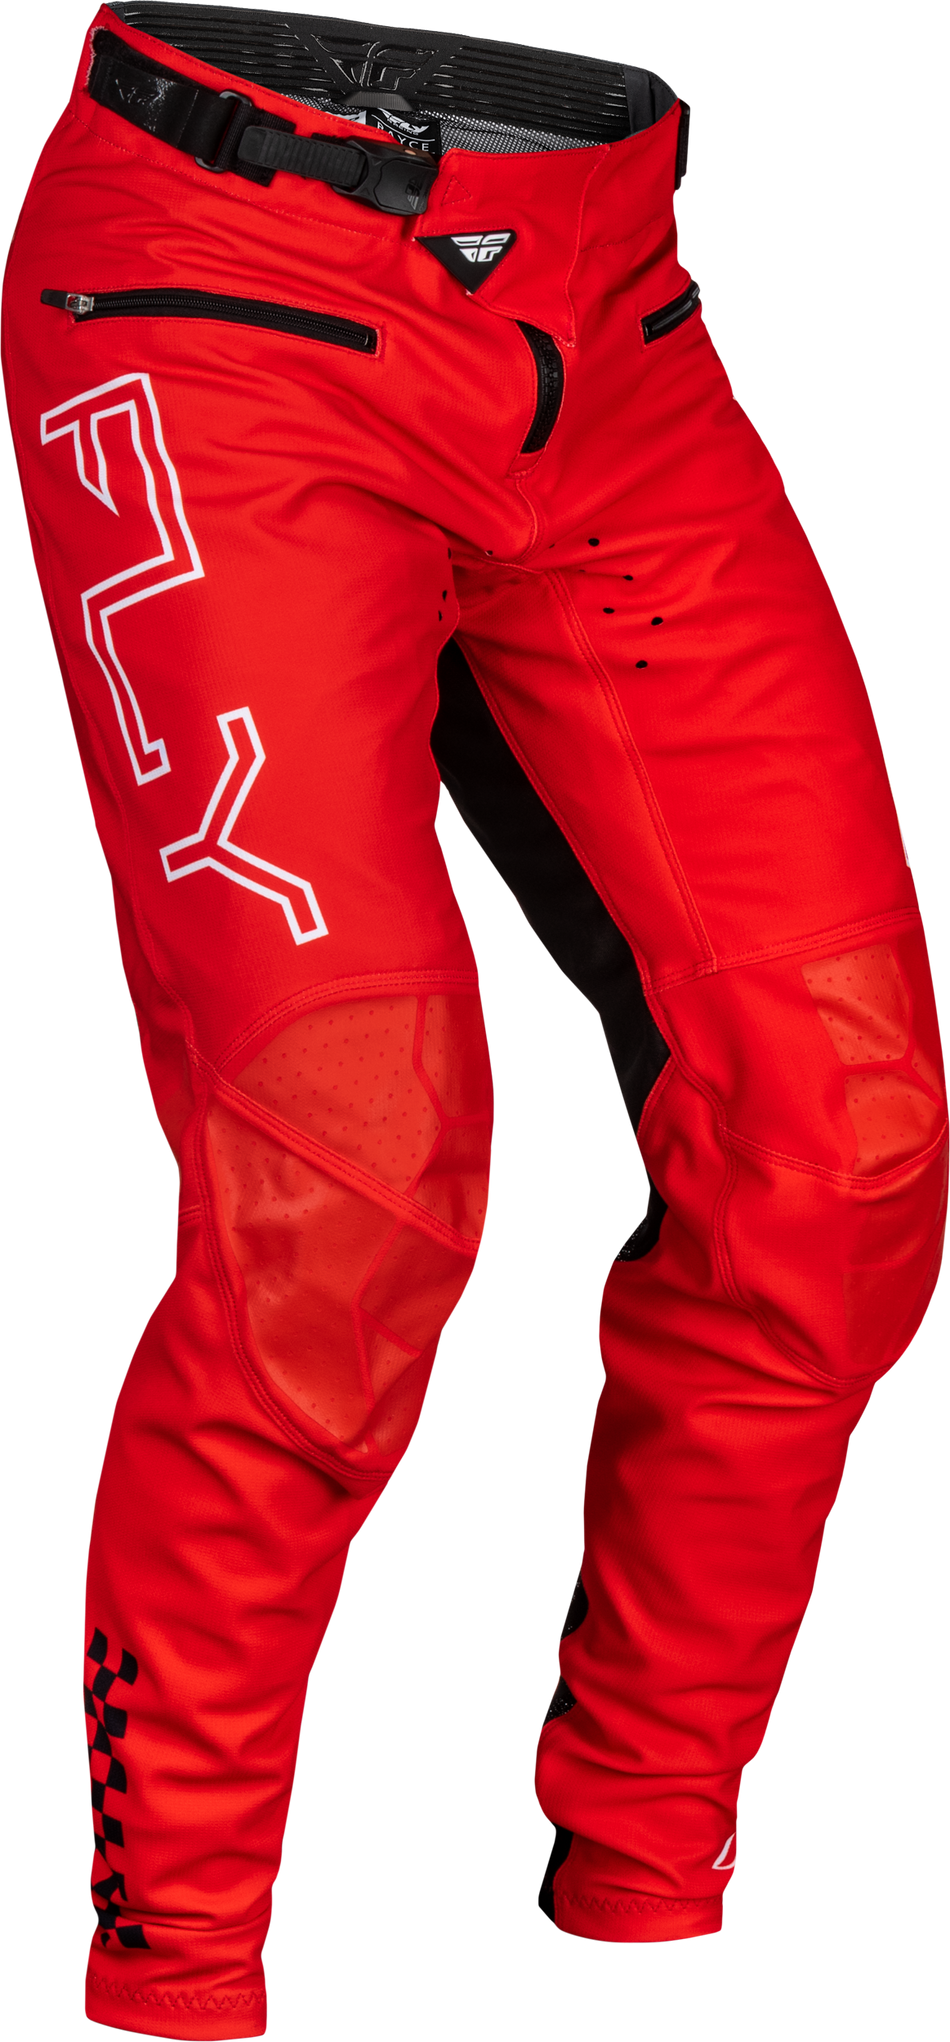 FLY RACING Youth Rayce Bicycle Pants Red Sz 20 377-06320